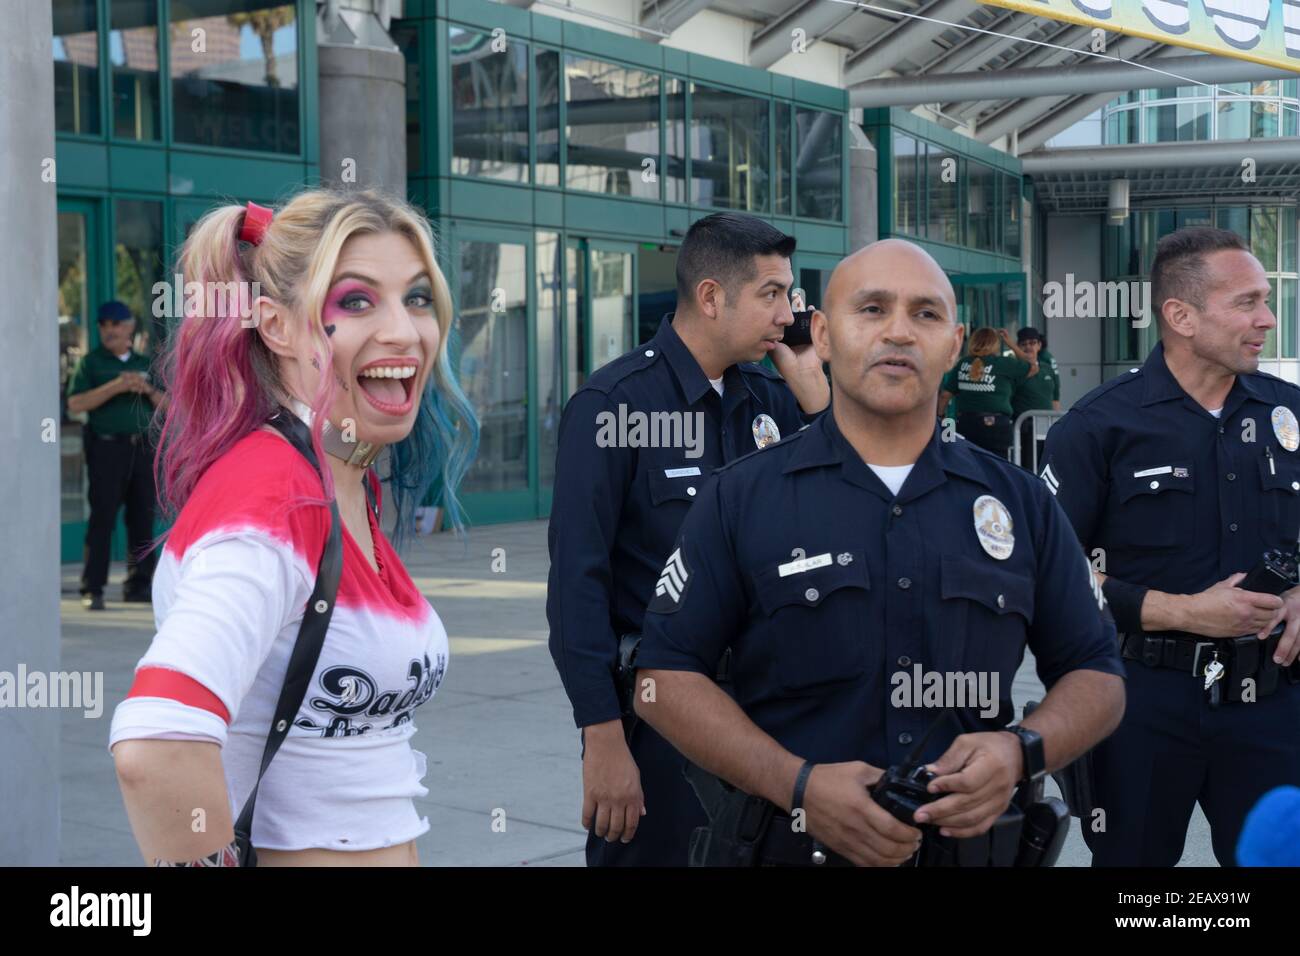 A cosplayer dressed as Harley Quinn from the DC universe poses smiling widely next to three LAPD policemen on duty. Stock Photo